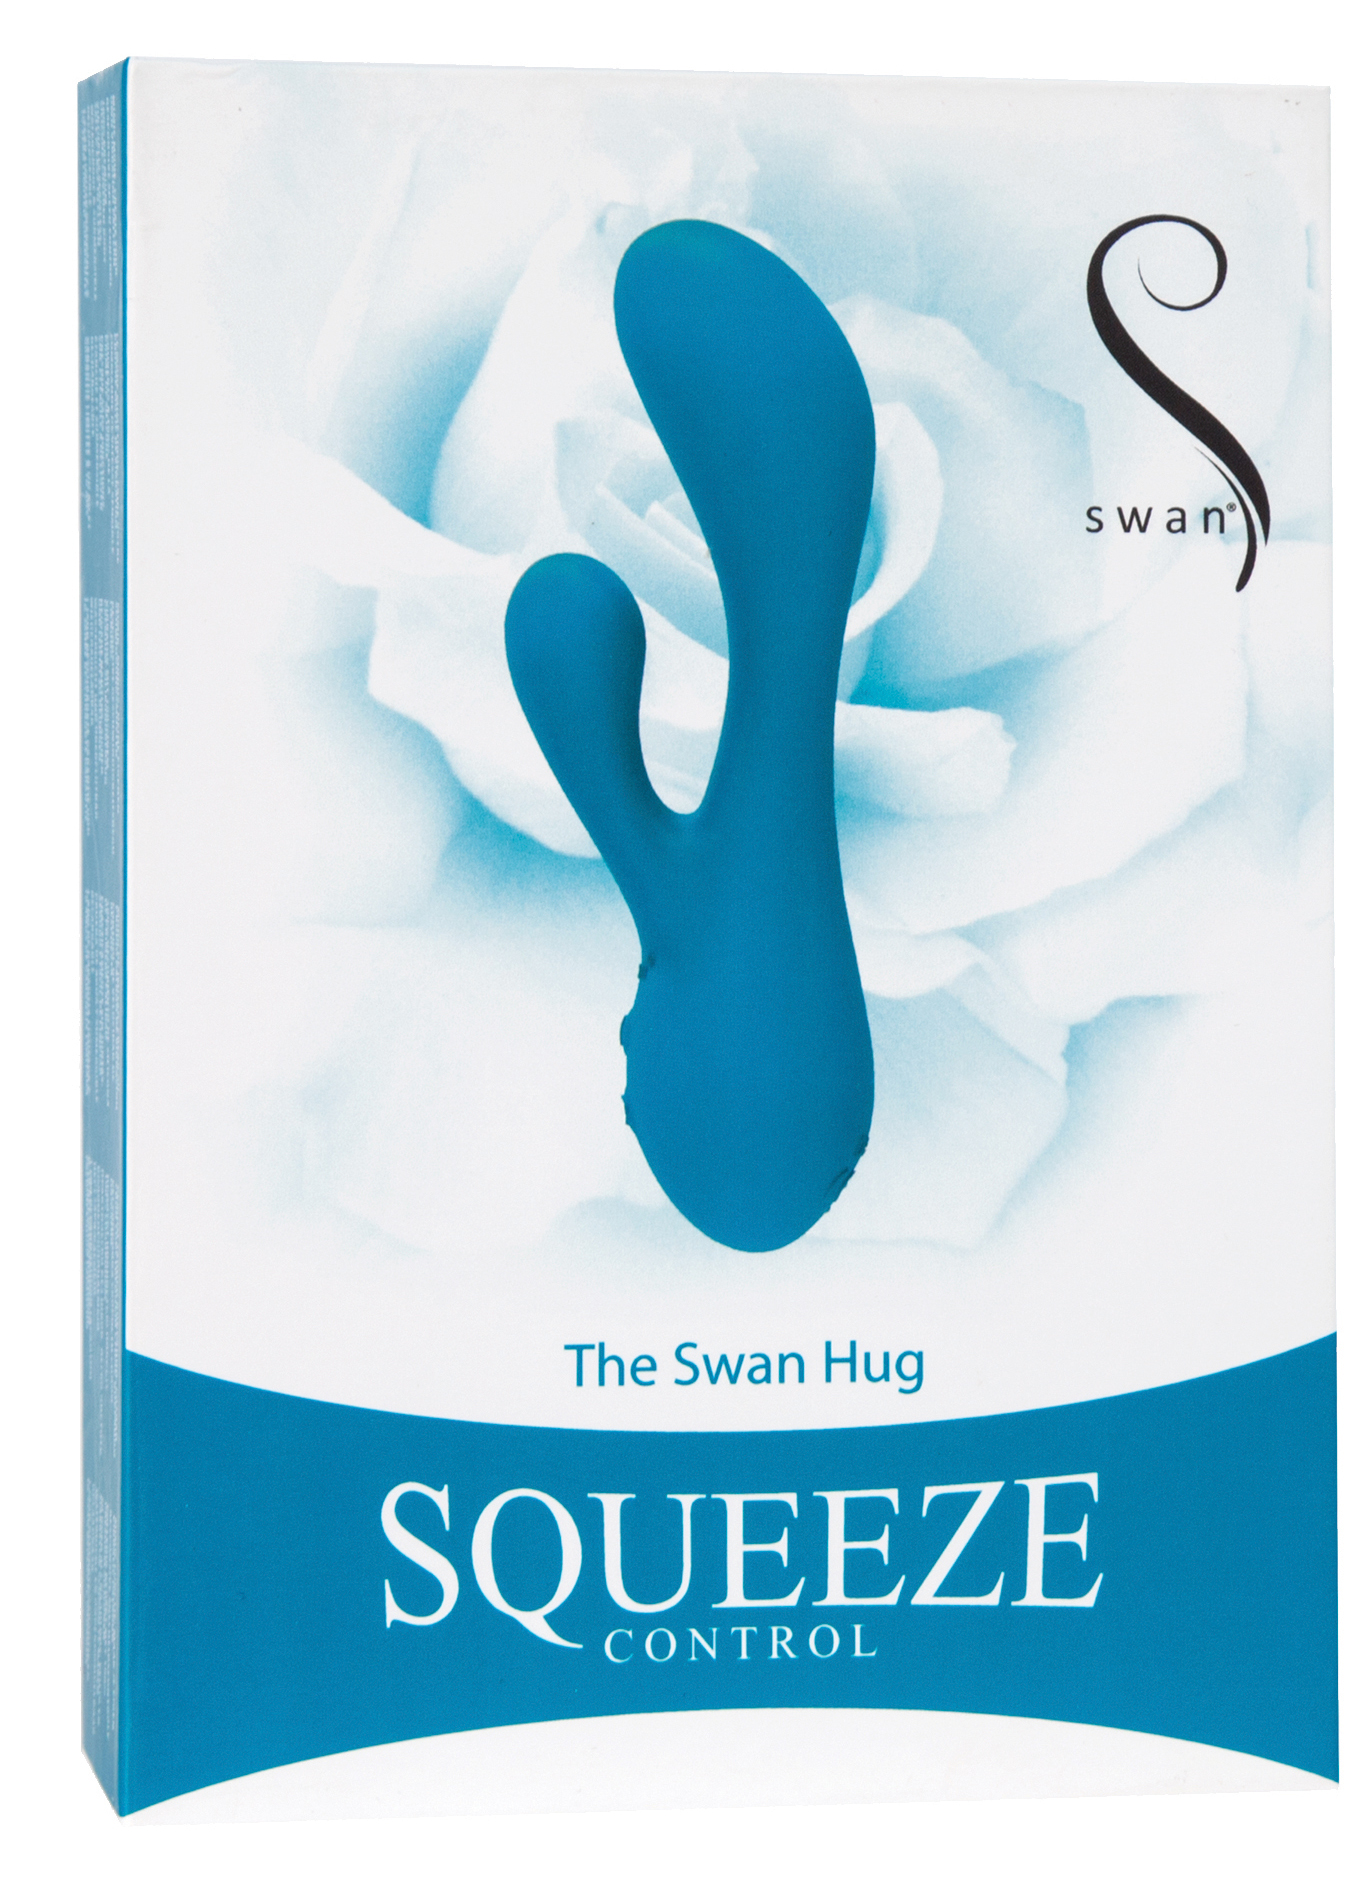 SQUEEZE CONTROL - The Swan Hug teal